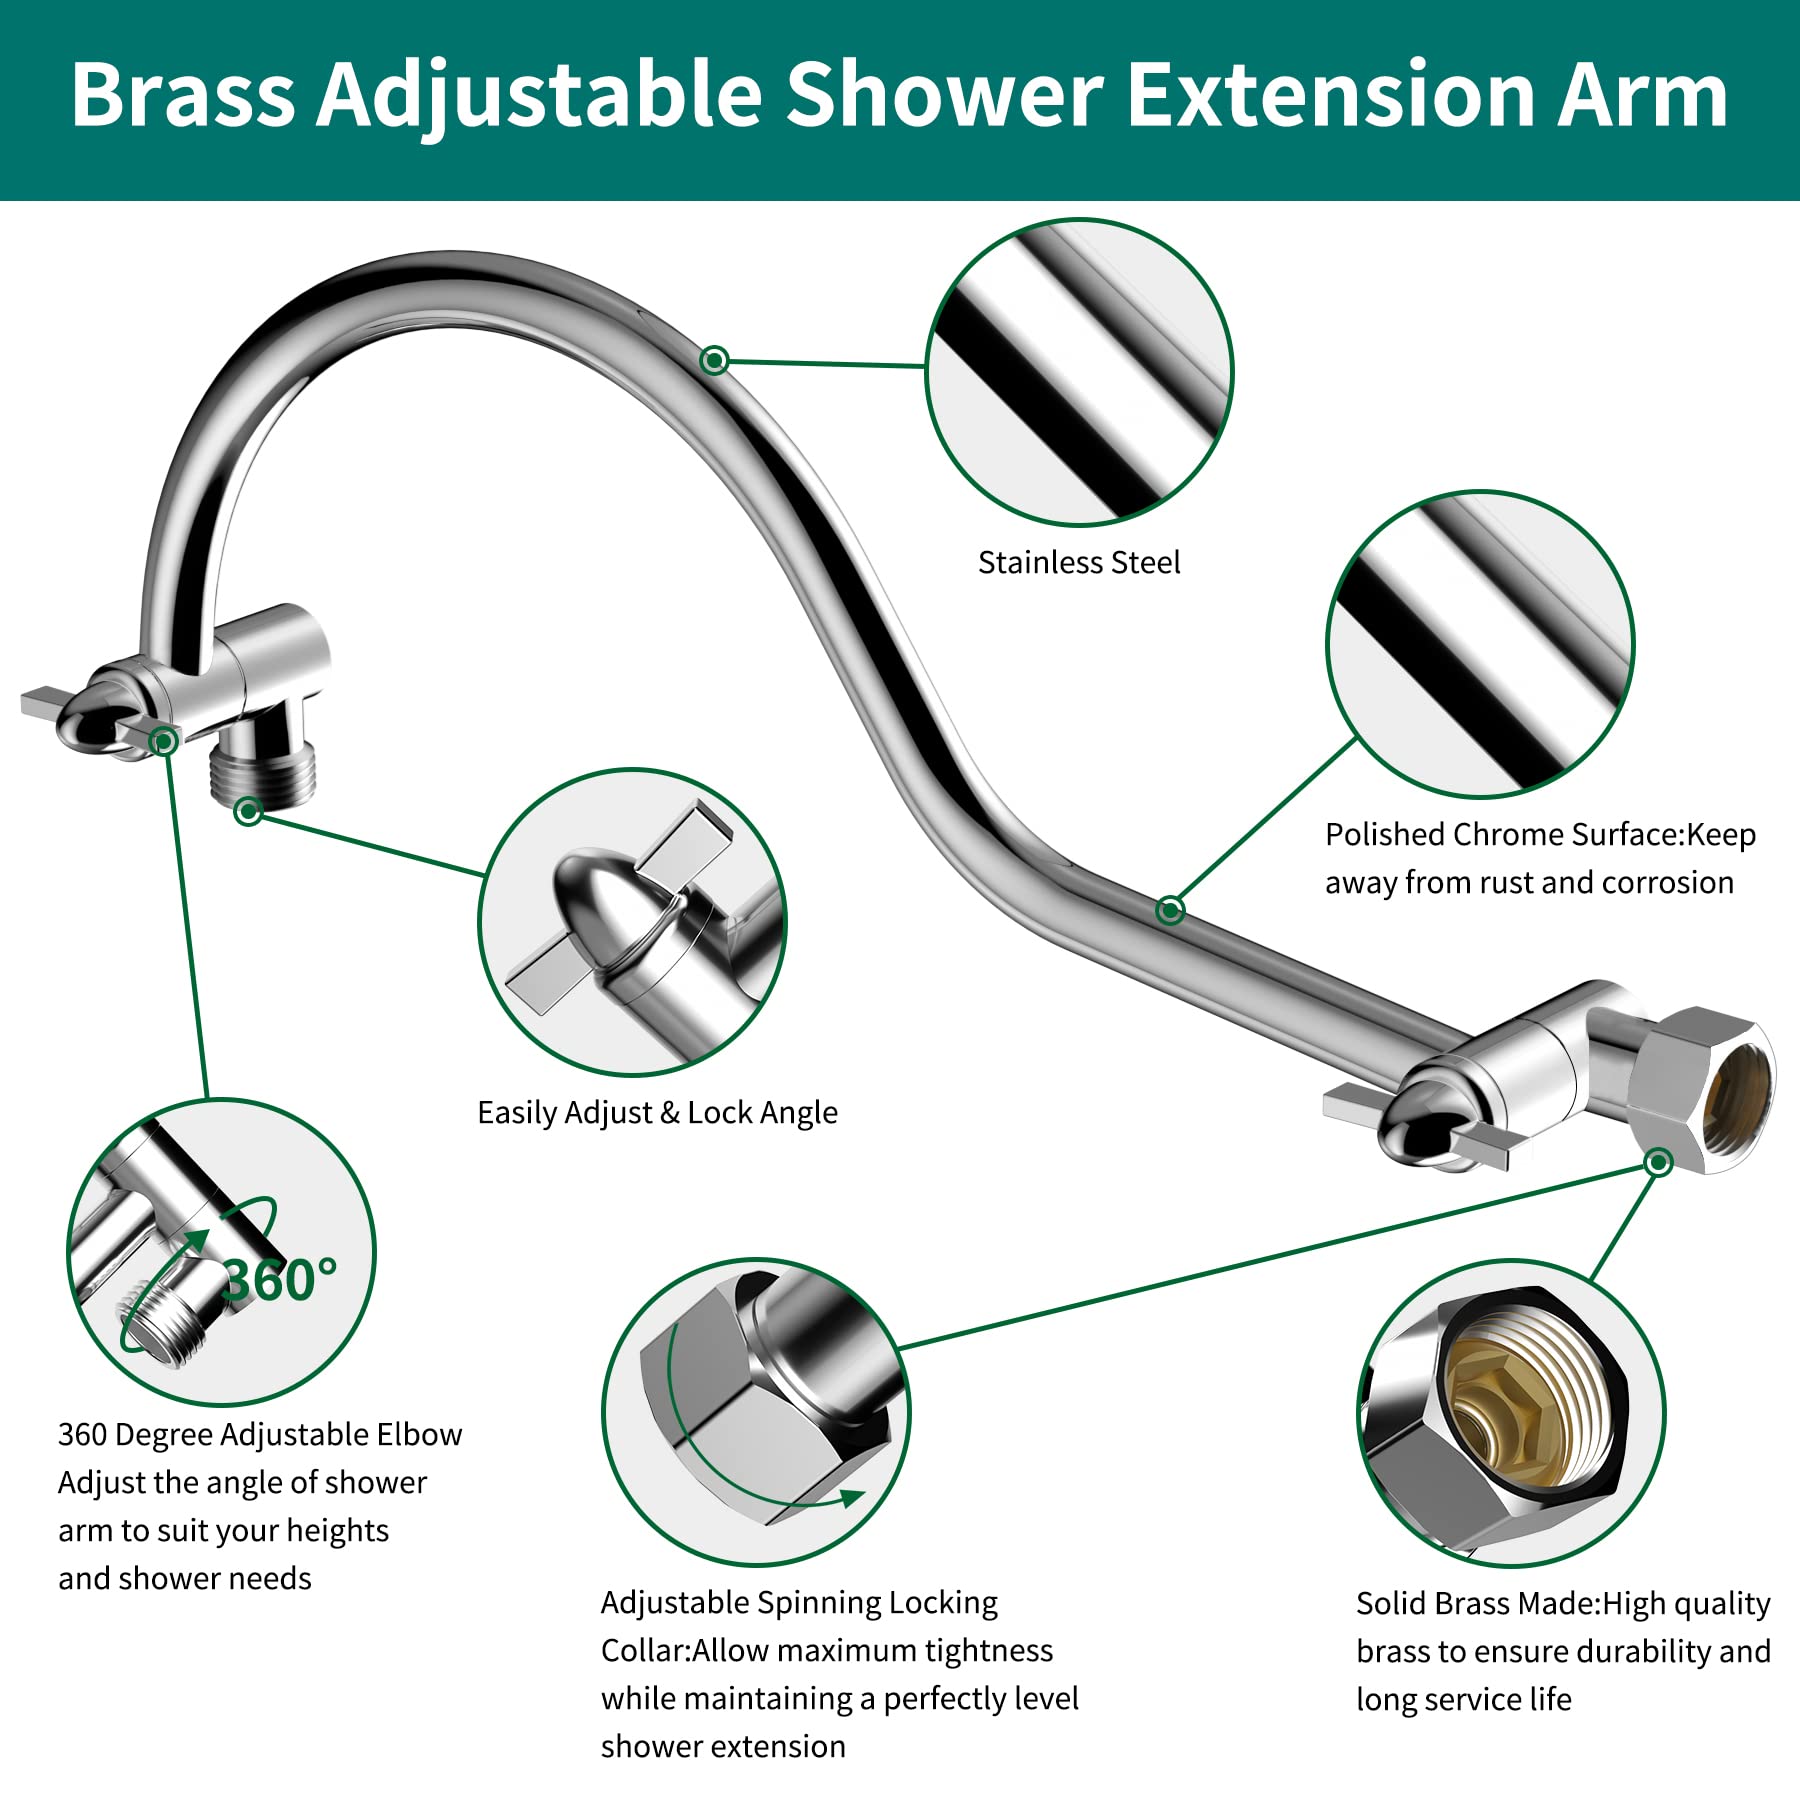 All Metal 16 Inch Solid Brass Adjustable Curved Shower Head Extension Arm Flexible Height & Angle Shower Arm Extender with Lock Joints,Universal Connection Stainless Steel Pipe Height Extending,Chrome